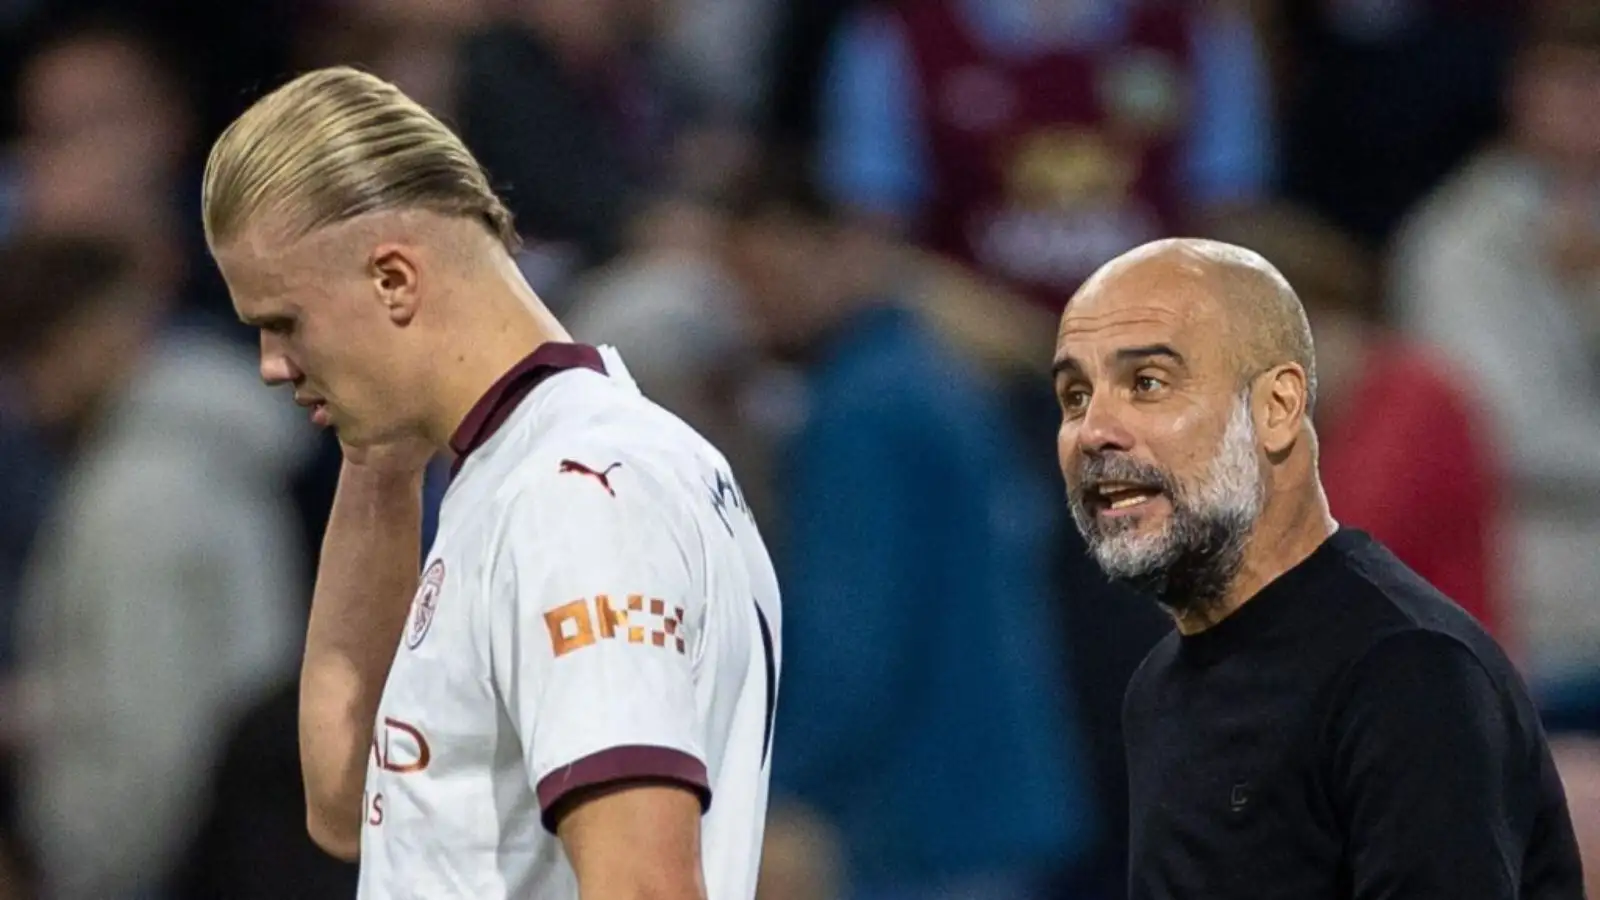 Pep Guardiola supplies Erling Haaland a compact of stick at fifty percent-time.